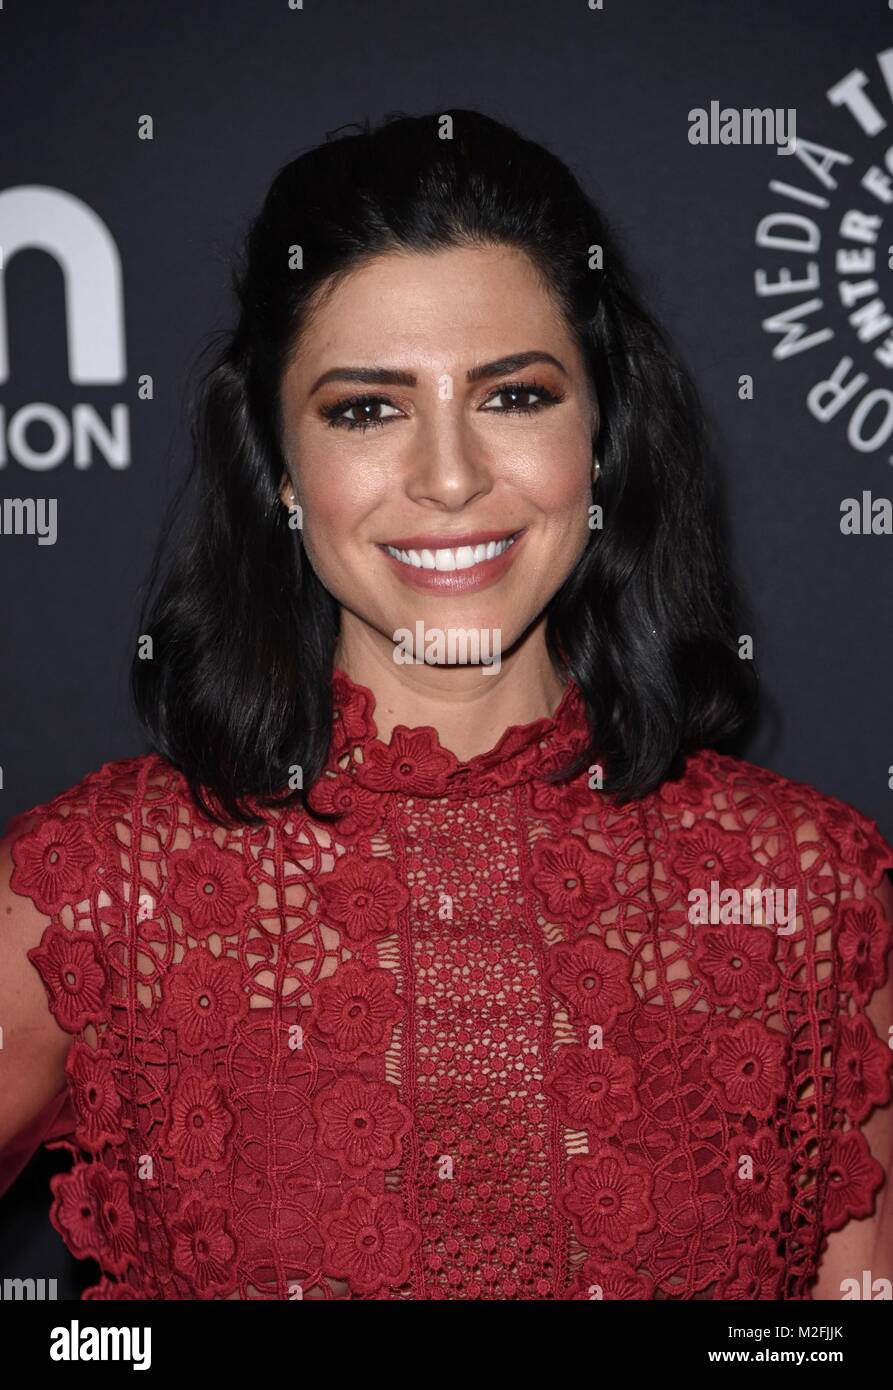 New York, NY, USA. 7th Feb, 2018. Cindy Sampson at arrivals for ION Television's PRIVATE EYES Preview Screening and Discussion, The Paley Center for Media, New York, NY February 7, 2018. Credit: Derek Storm/Everett Collection/Alamy Live News Stock Photo